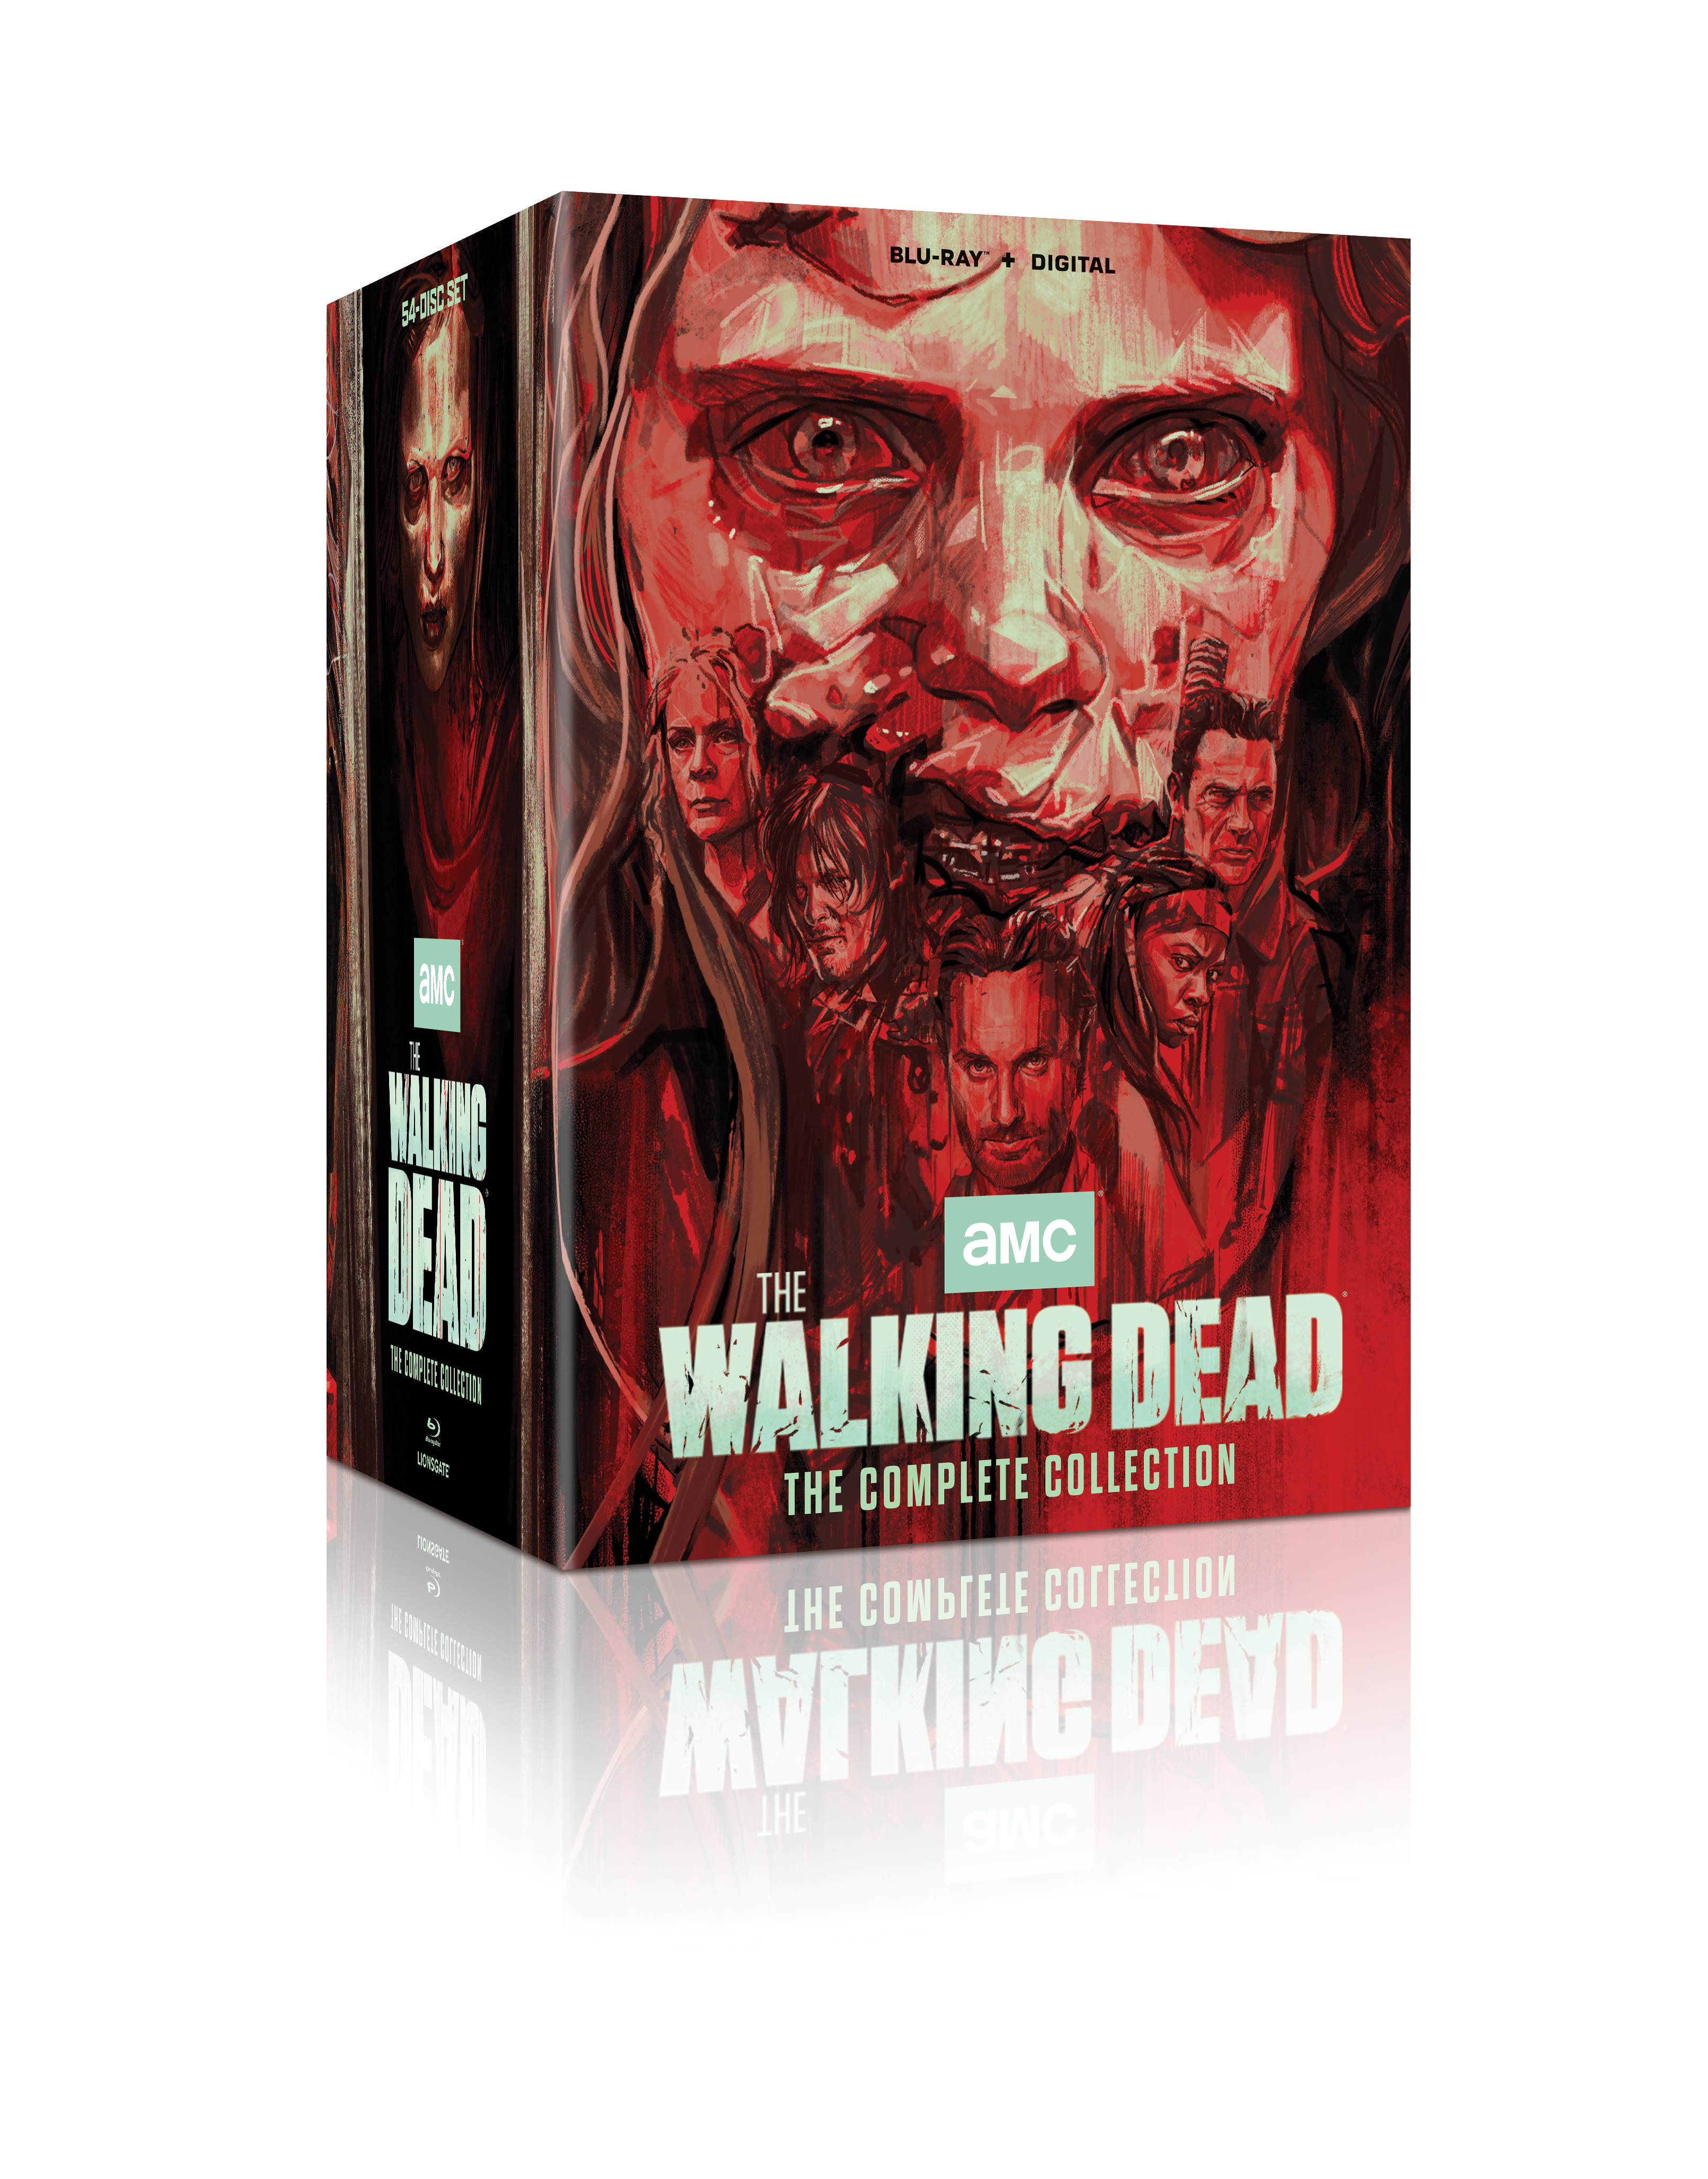 The Walking Dead The Complete Collection Blu-Ray Combo Pack cover (Lionsgate)